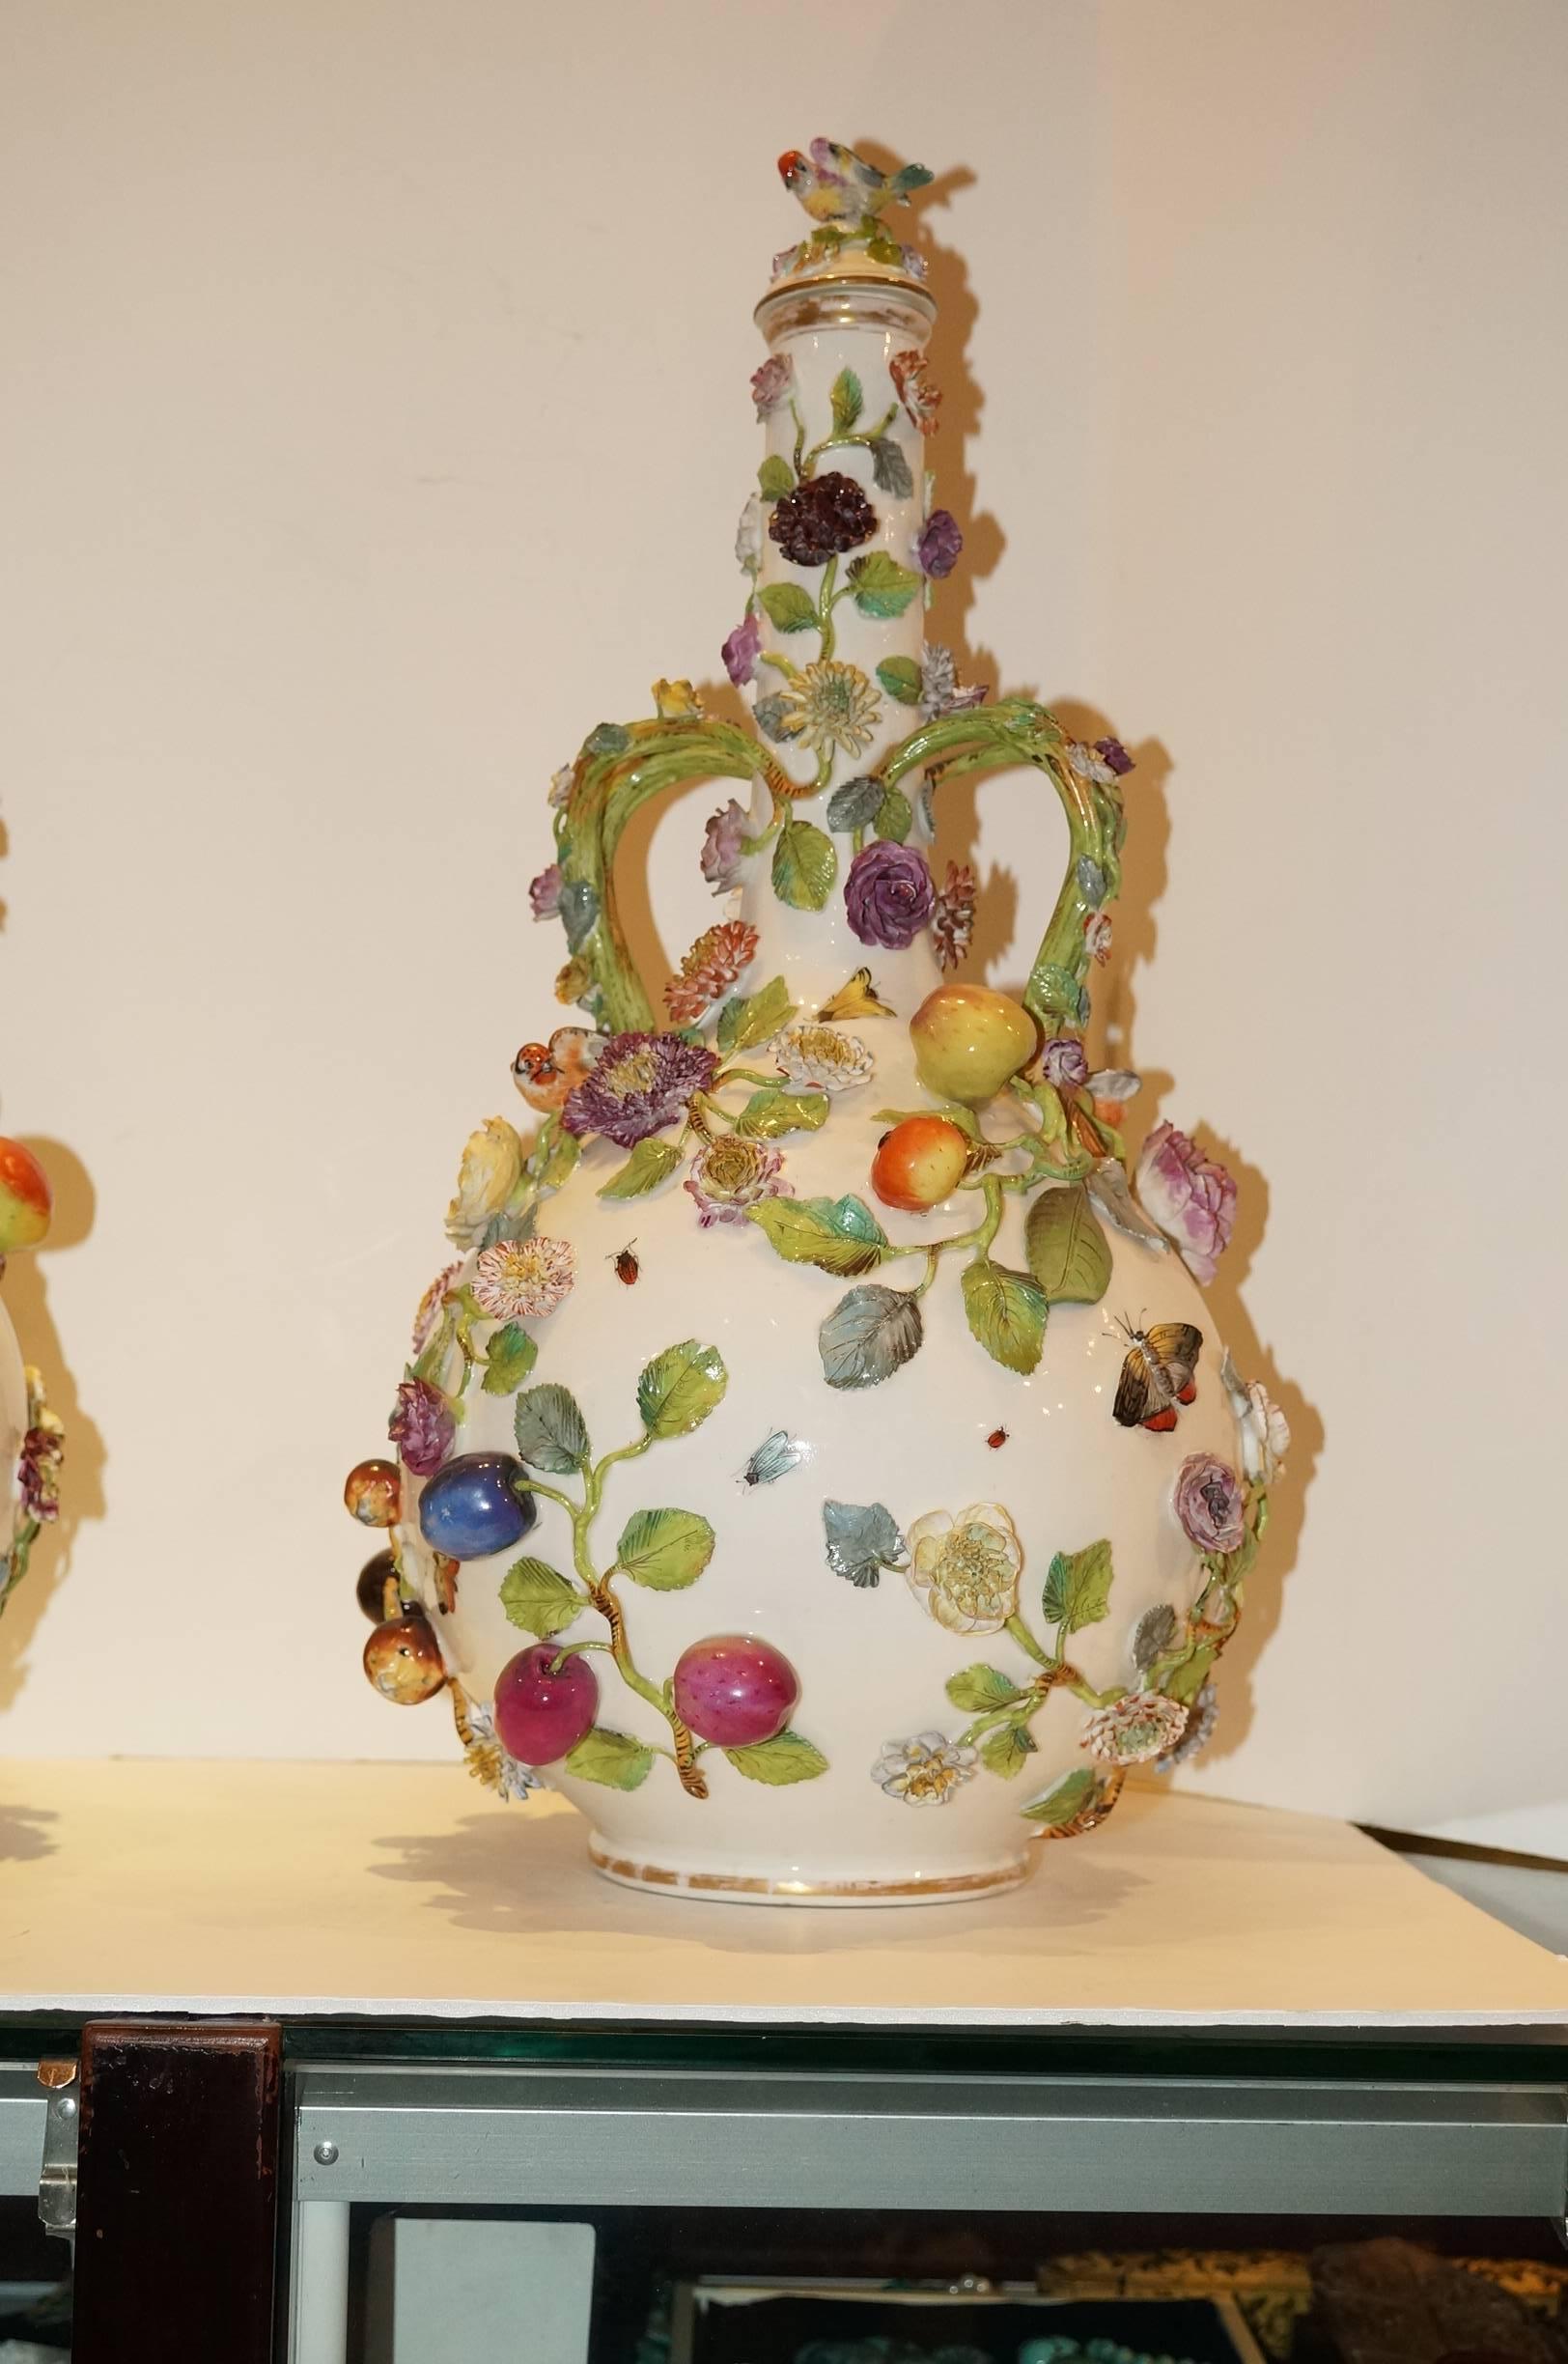 19th Century Pair of Continental Porcelain Bottle Form Vases with applied Fruits and Flowers